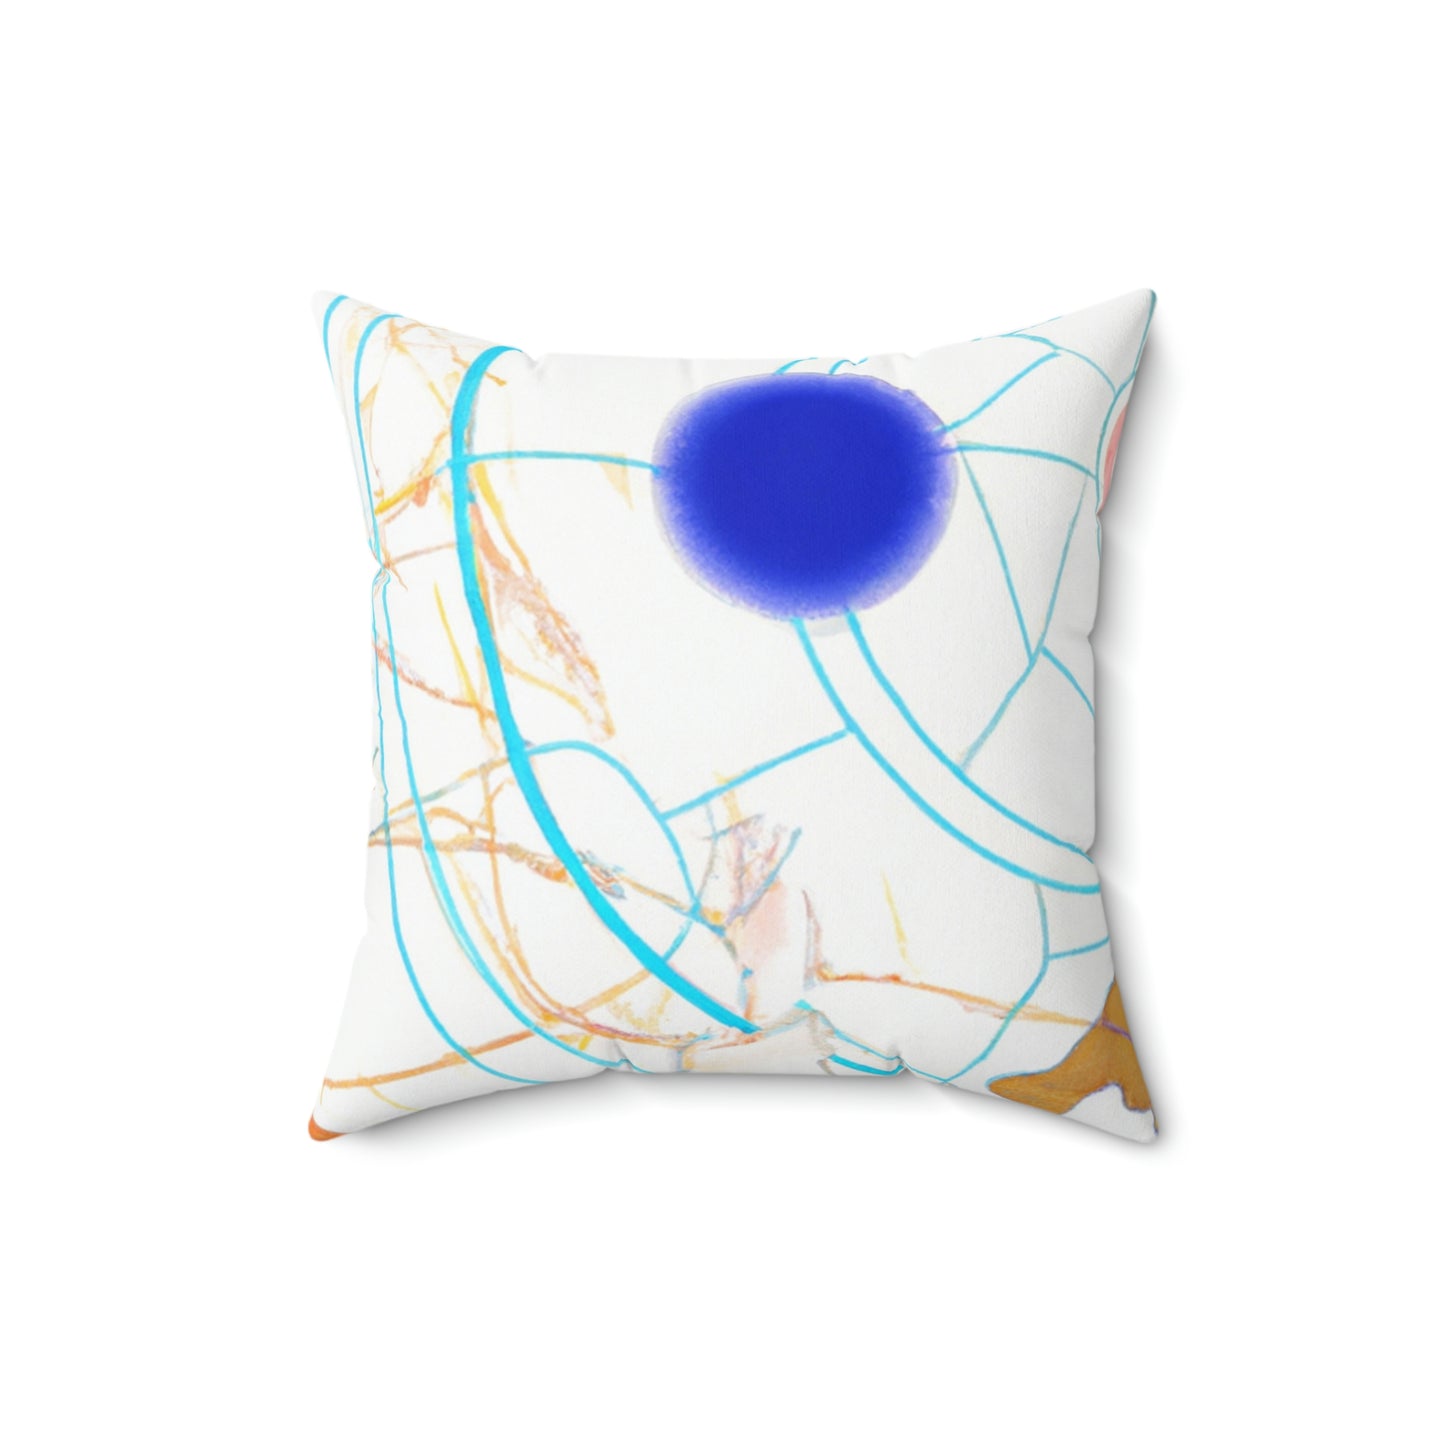 their school

The Secret Realm of High School - The Alien Square Pillow